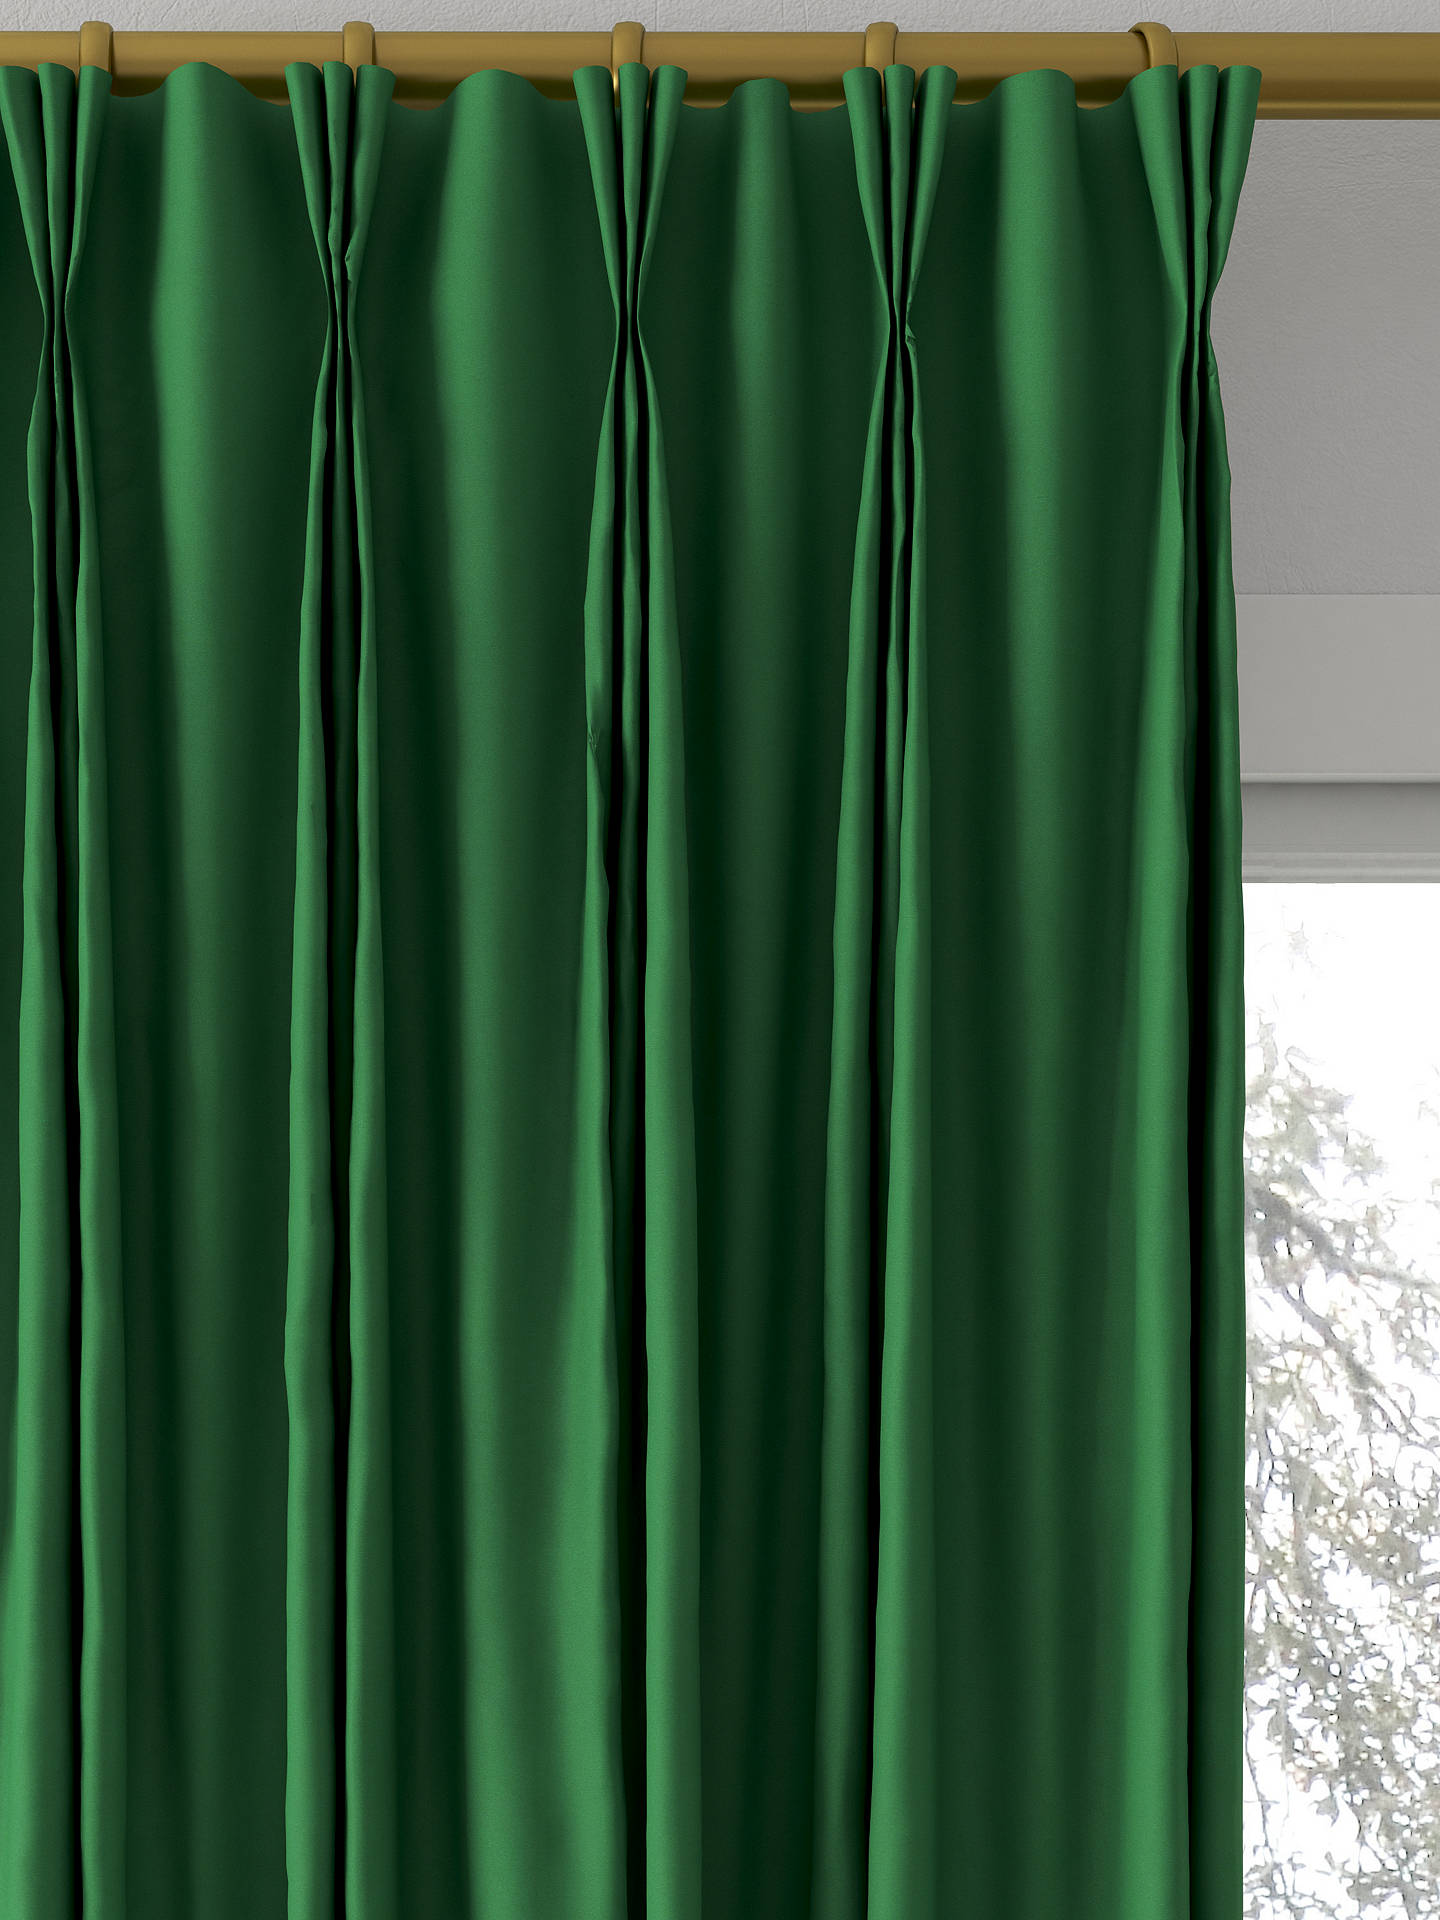 Harlequin Empower Plain Made to Measure Curtains, Bottle Green